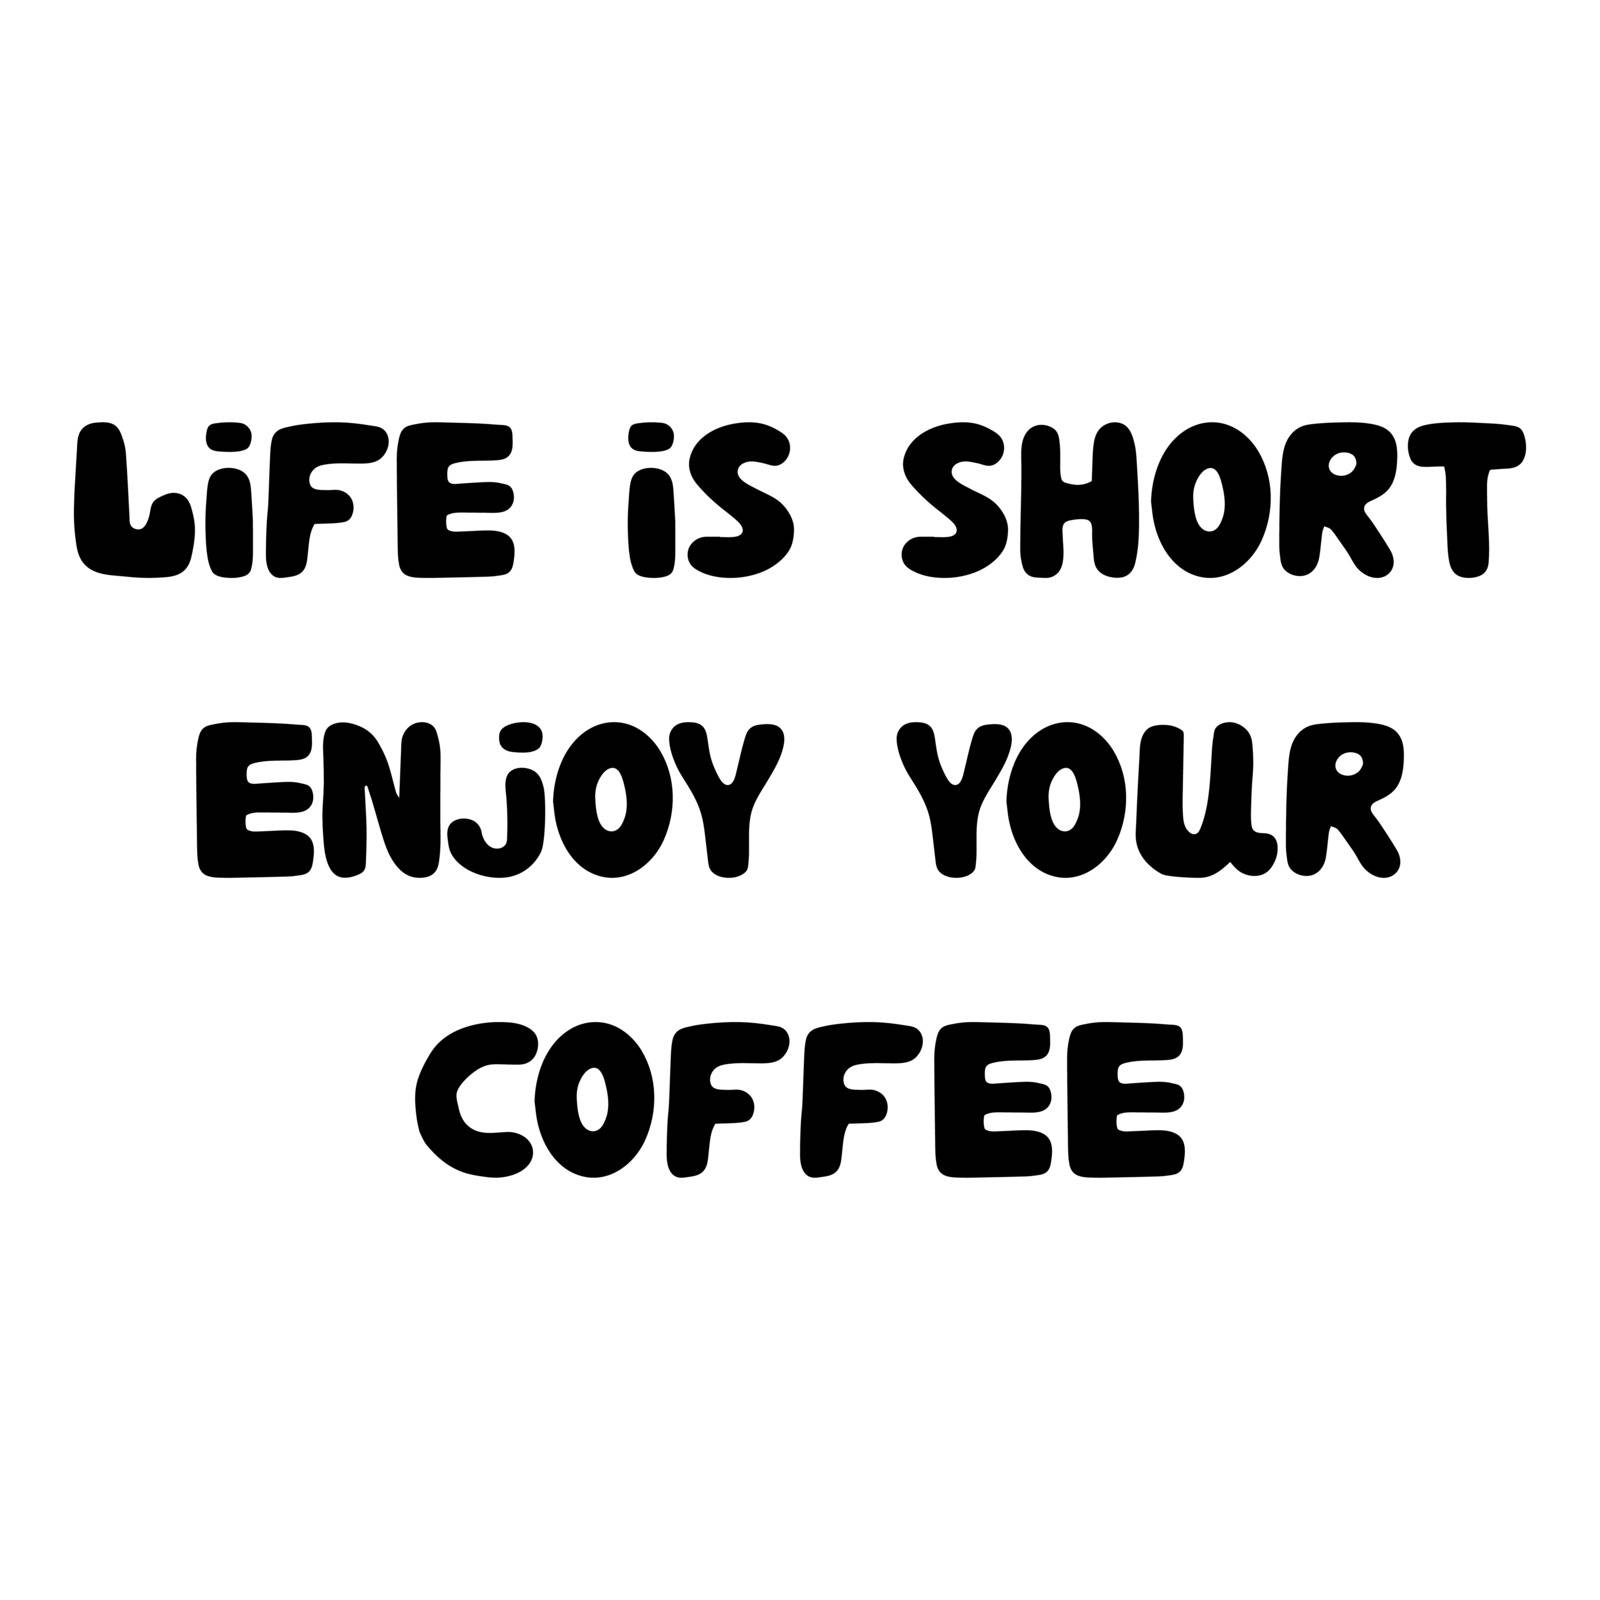 Life is short enjoy your coffee. Hand drawn bauble lettering.